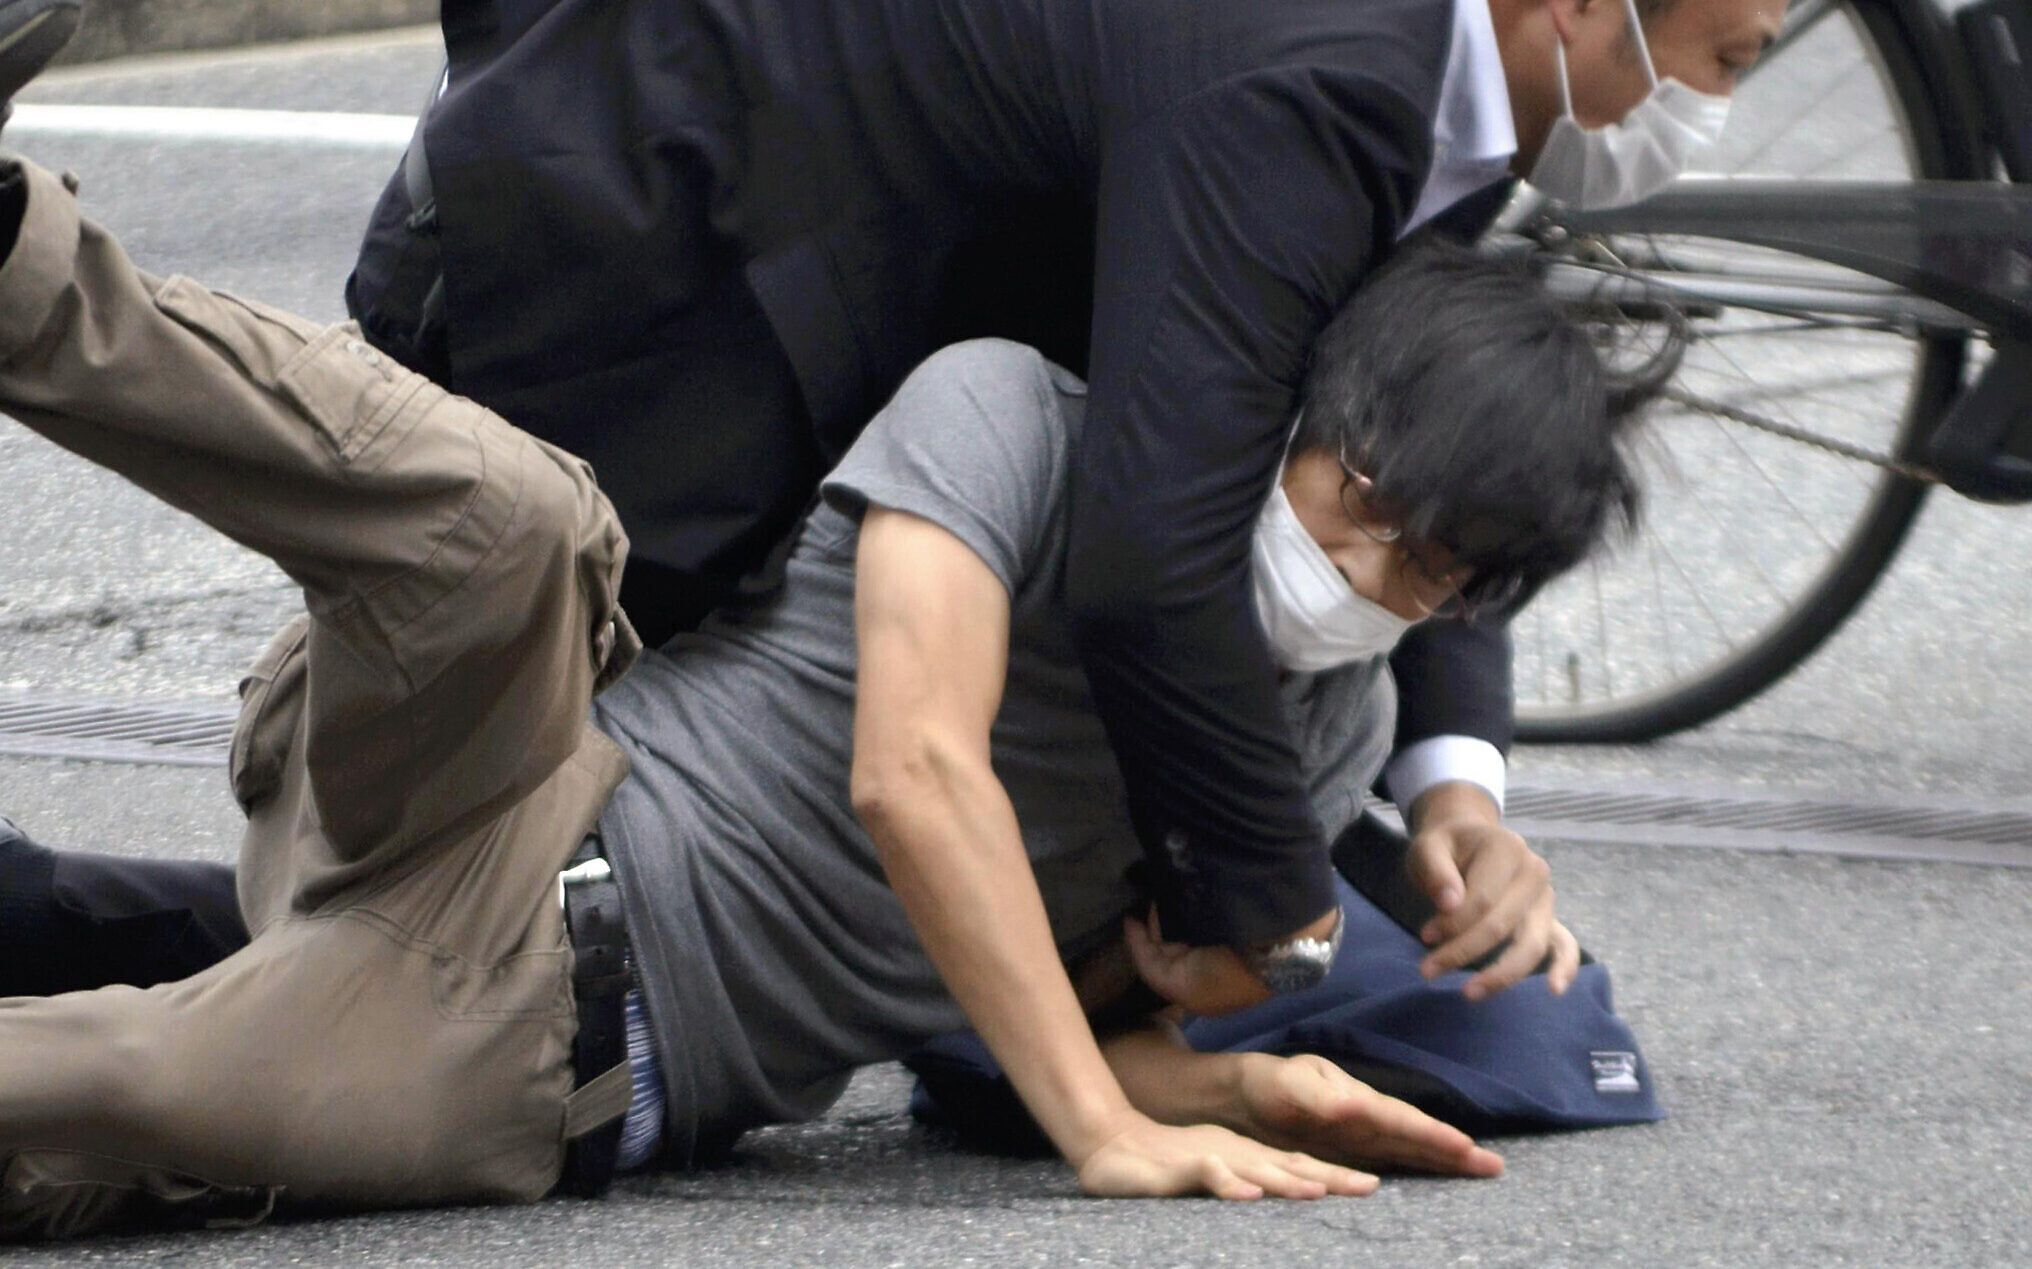 Attack on Japan's prime minister raises questions about security